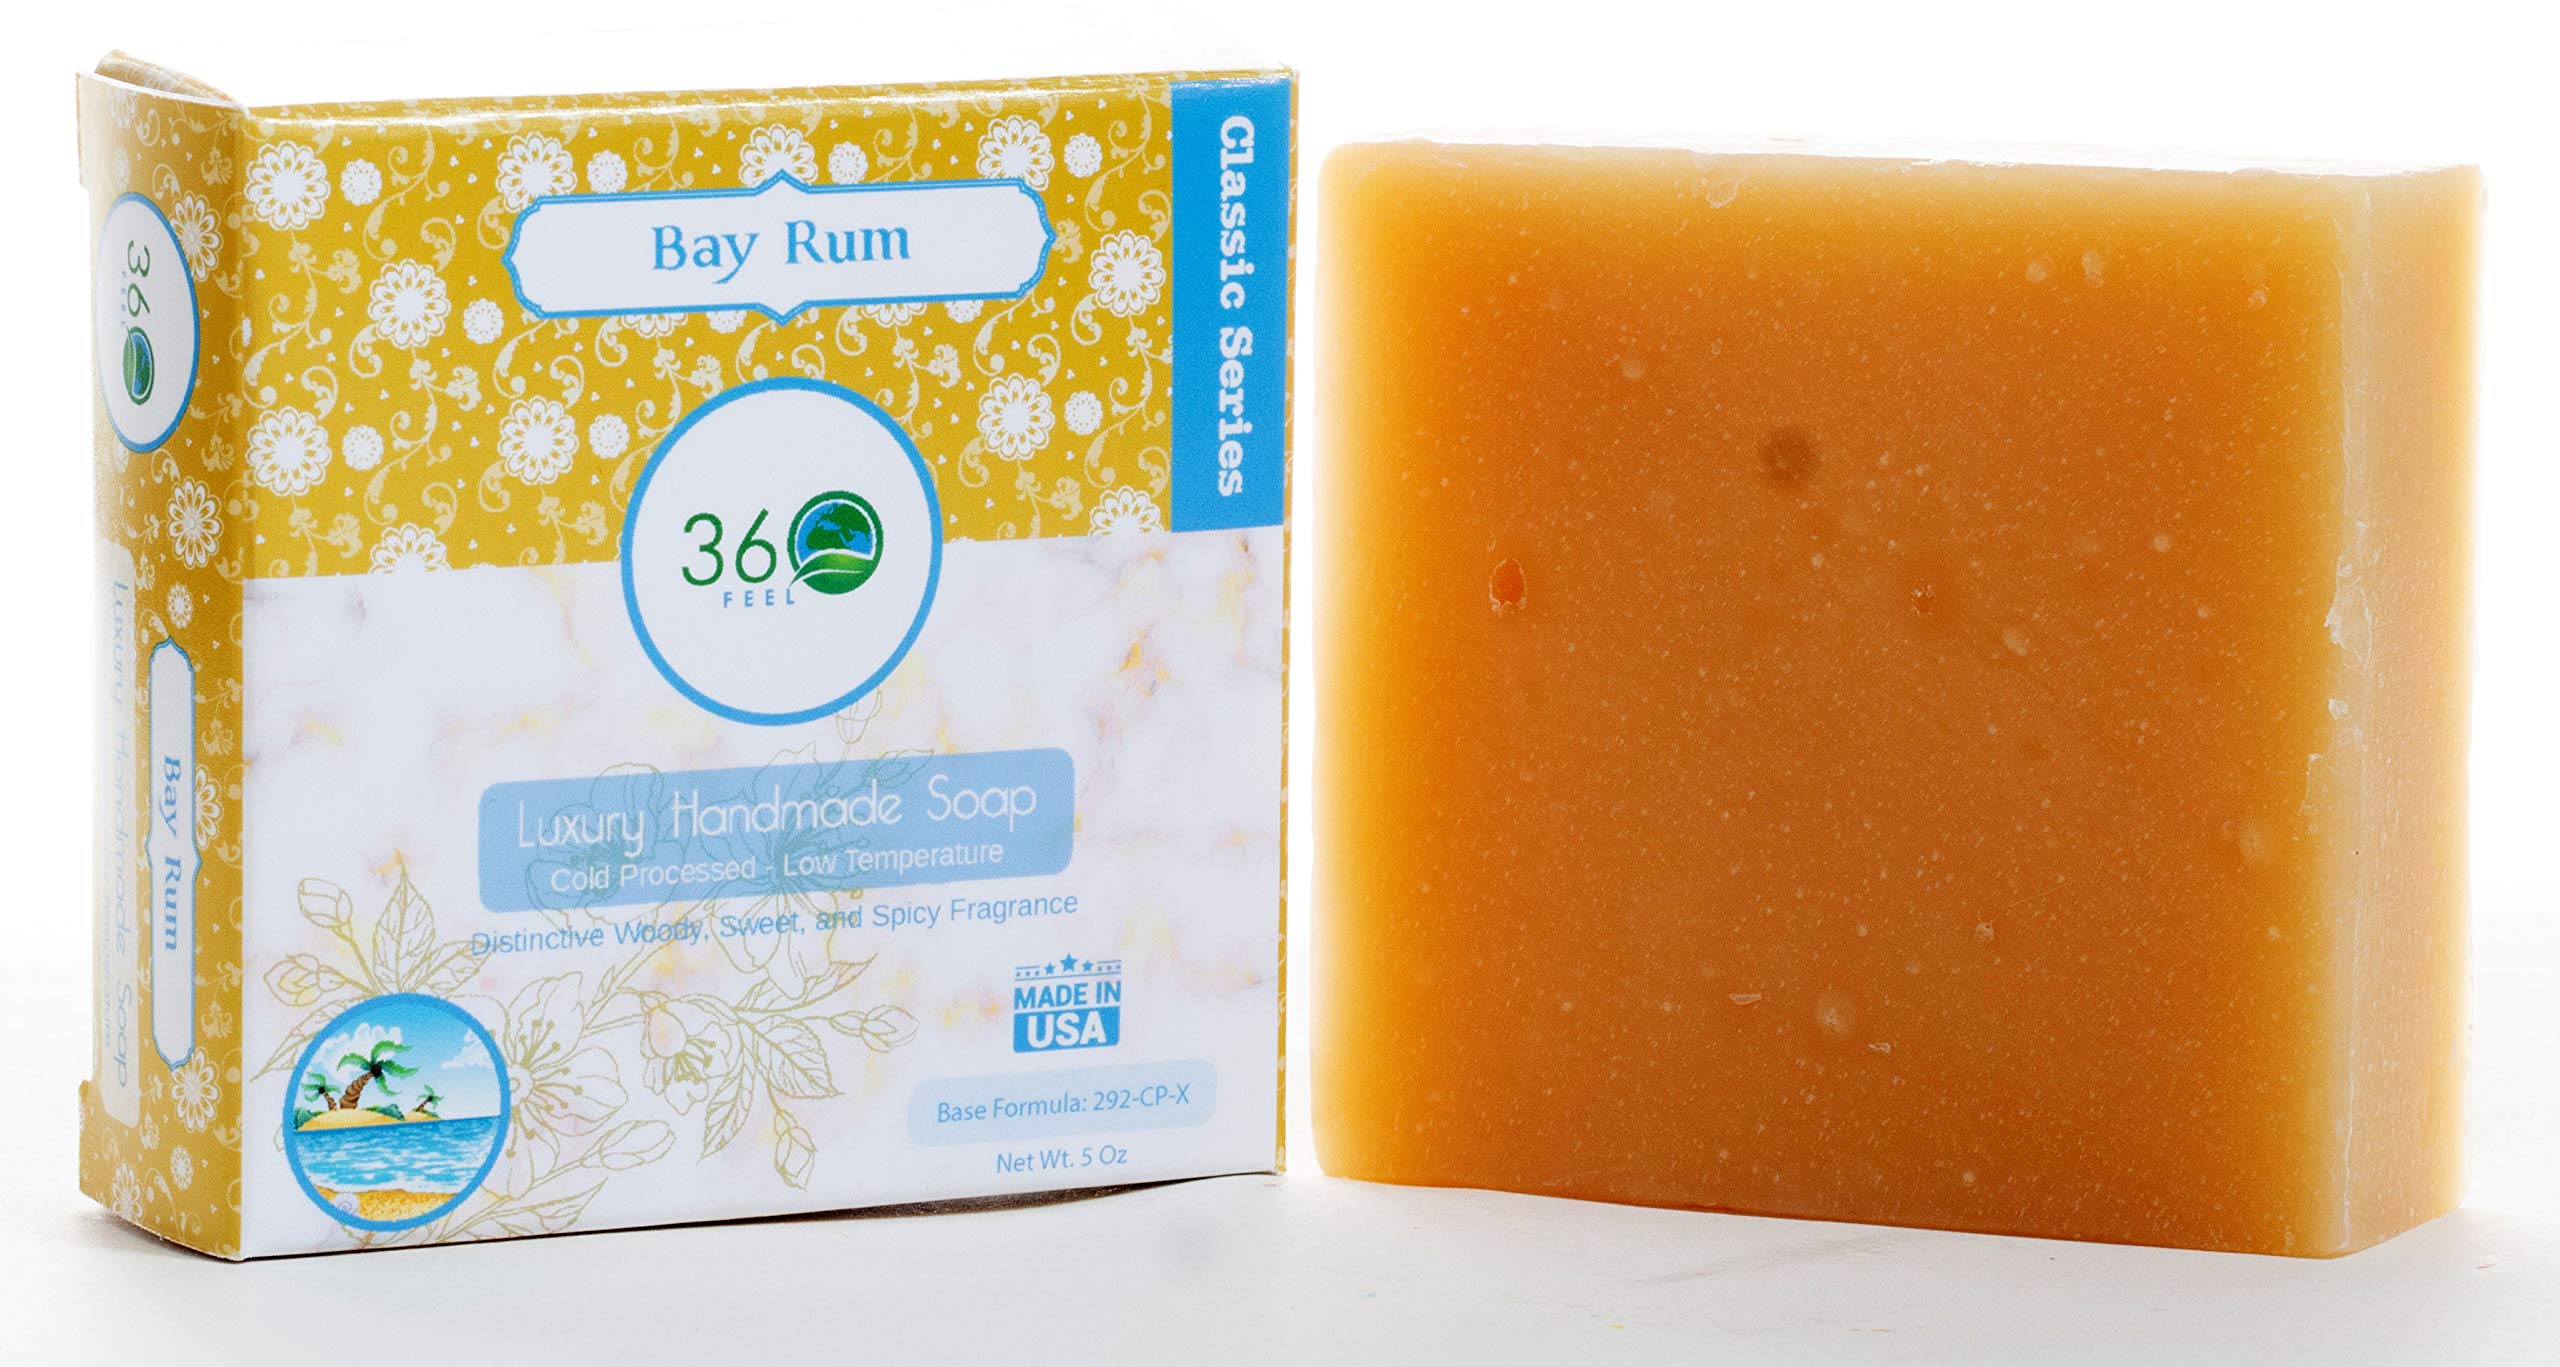 360Feel Bay Rum Soap - 5oz Handmade Mens Soap Bar with Natural Woodsy Sweet, Spicy Scent and Homemade Bay Rum Shaving Soap- Gift for Men - Castile Man Soaps bar - Gift ready